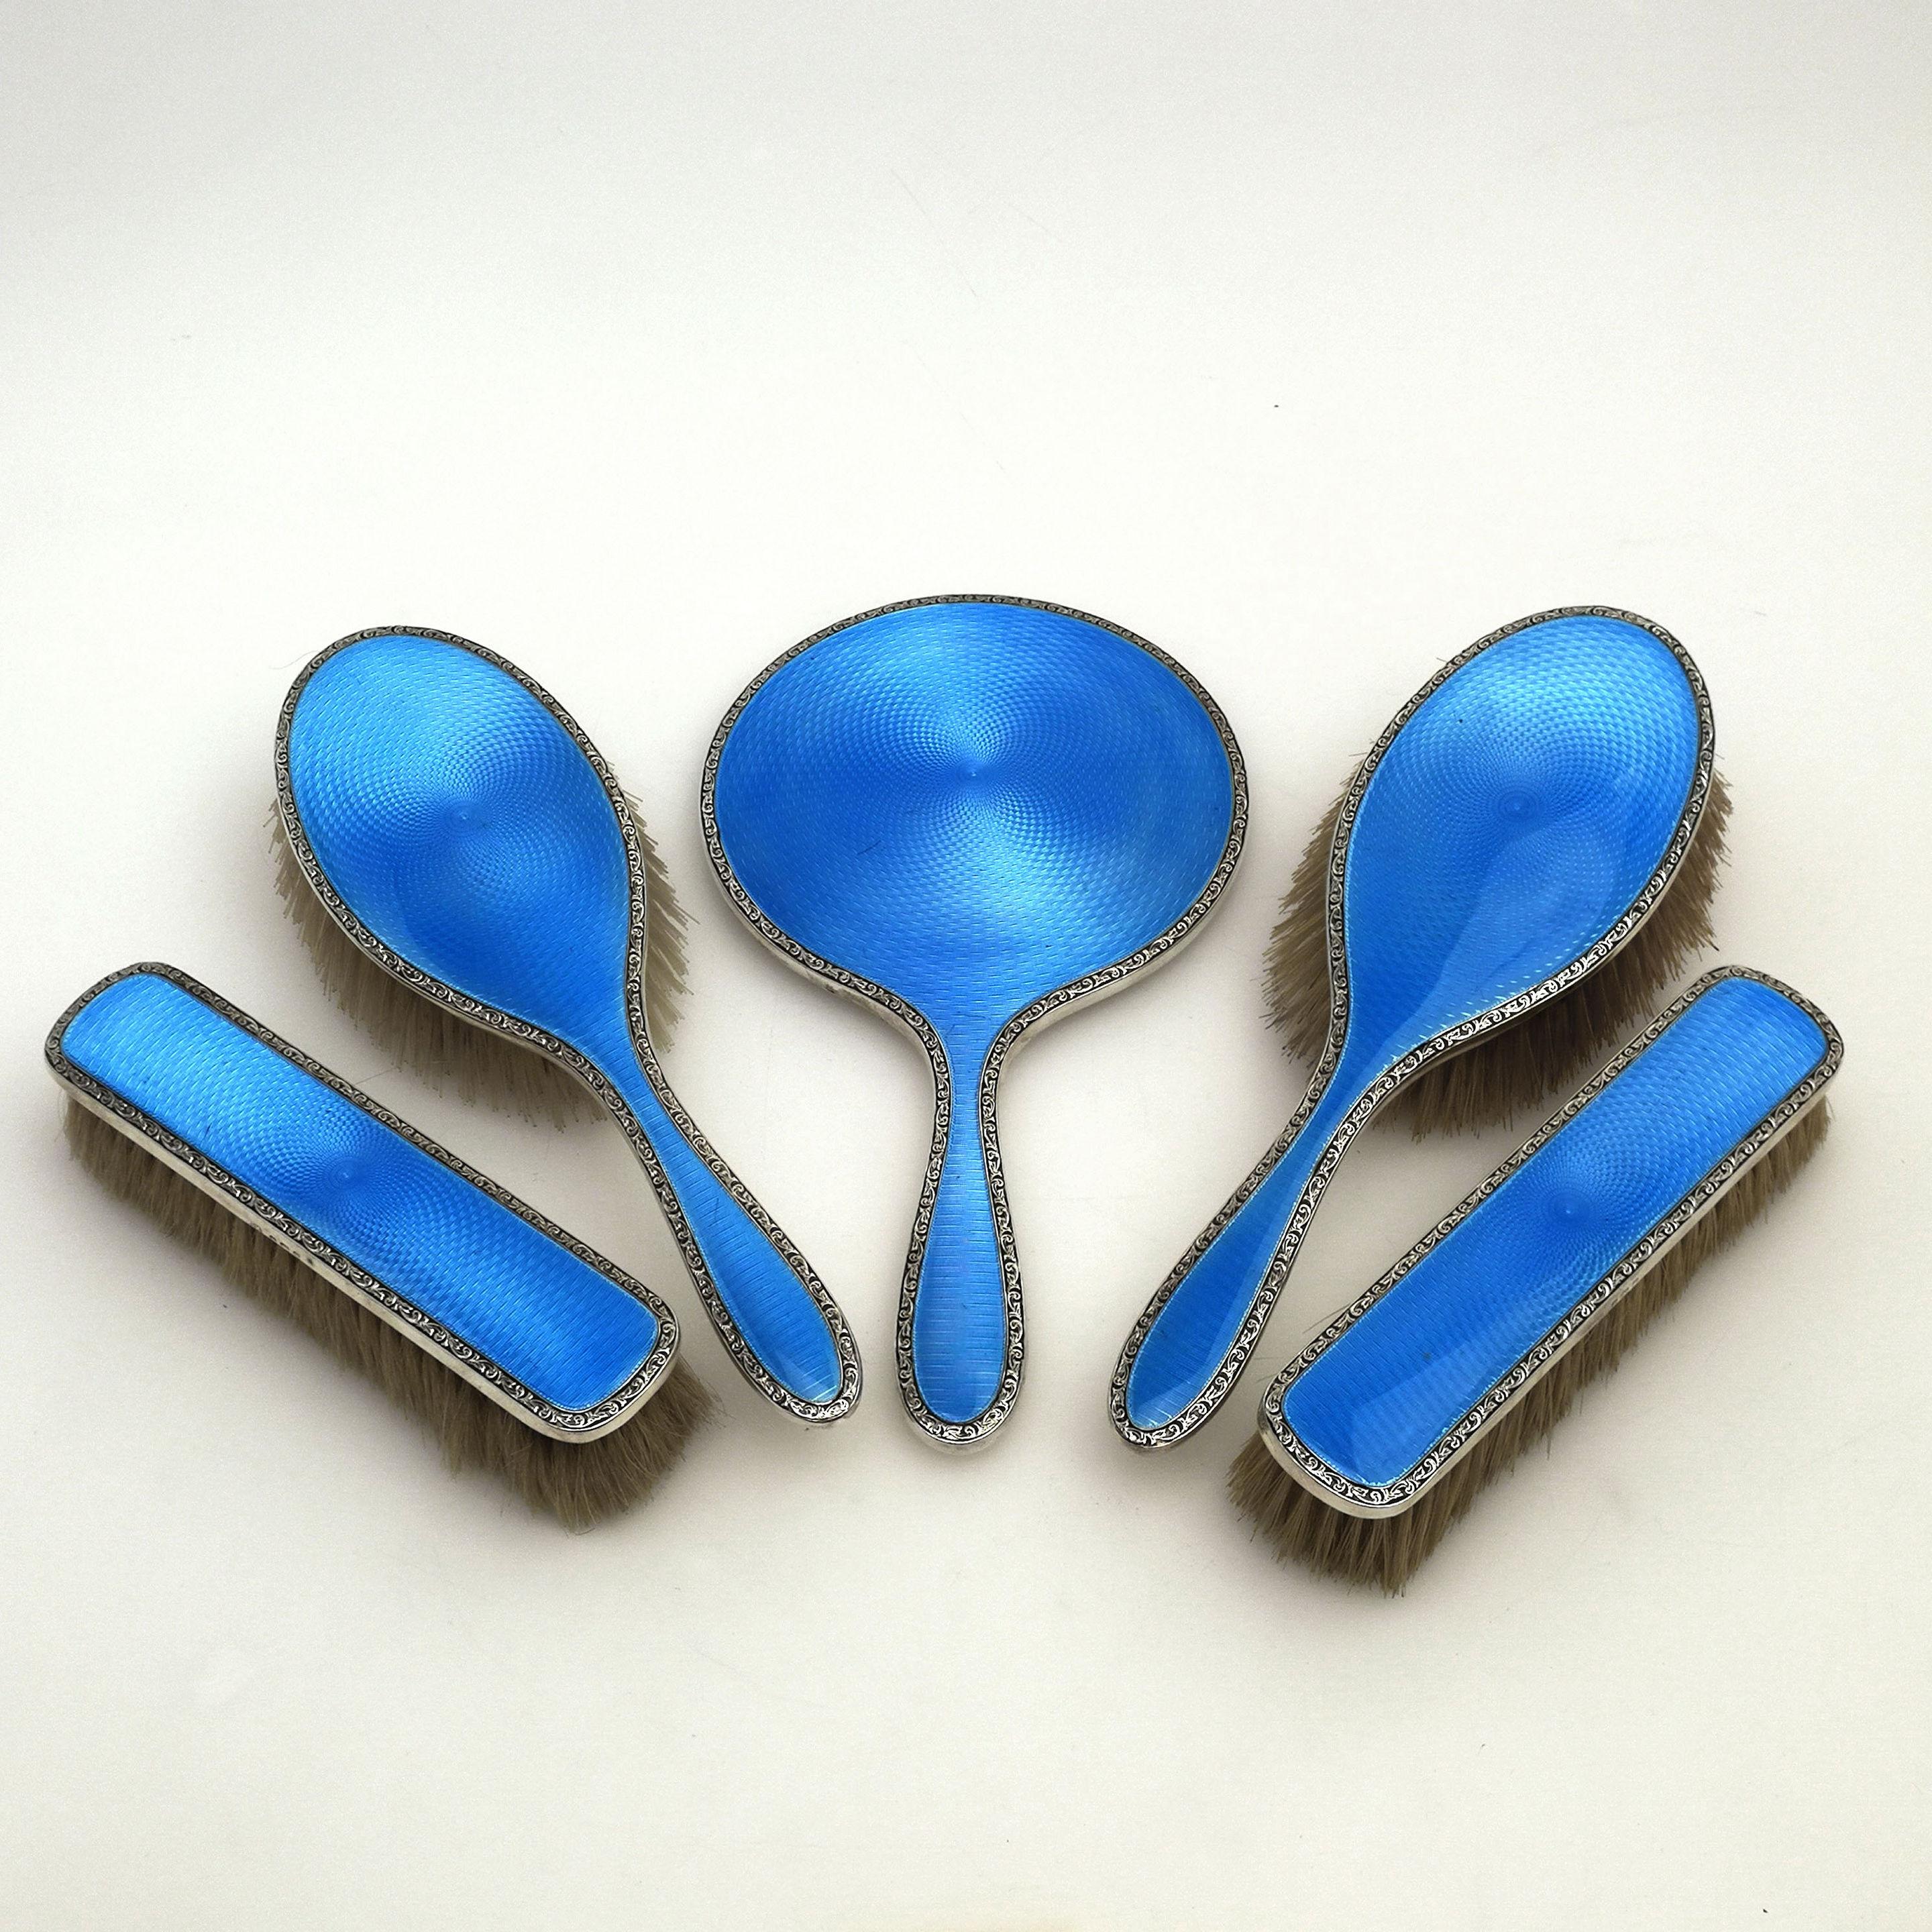 A gorgeous vintage sterling Silver & Enamel Dressing Set. Each piece in this Dressing Table Set is created in solid Silver and embellished with a rich blue guilloche enamel design. The Vanity Set comprises of a hand mirror, a pair of hair brushes, a